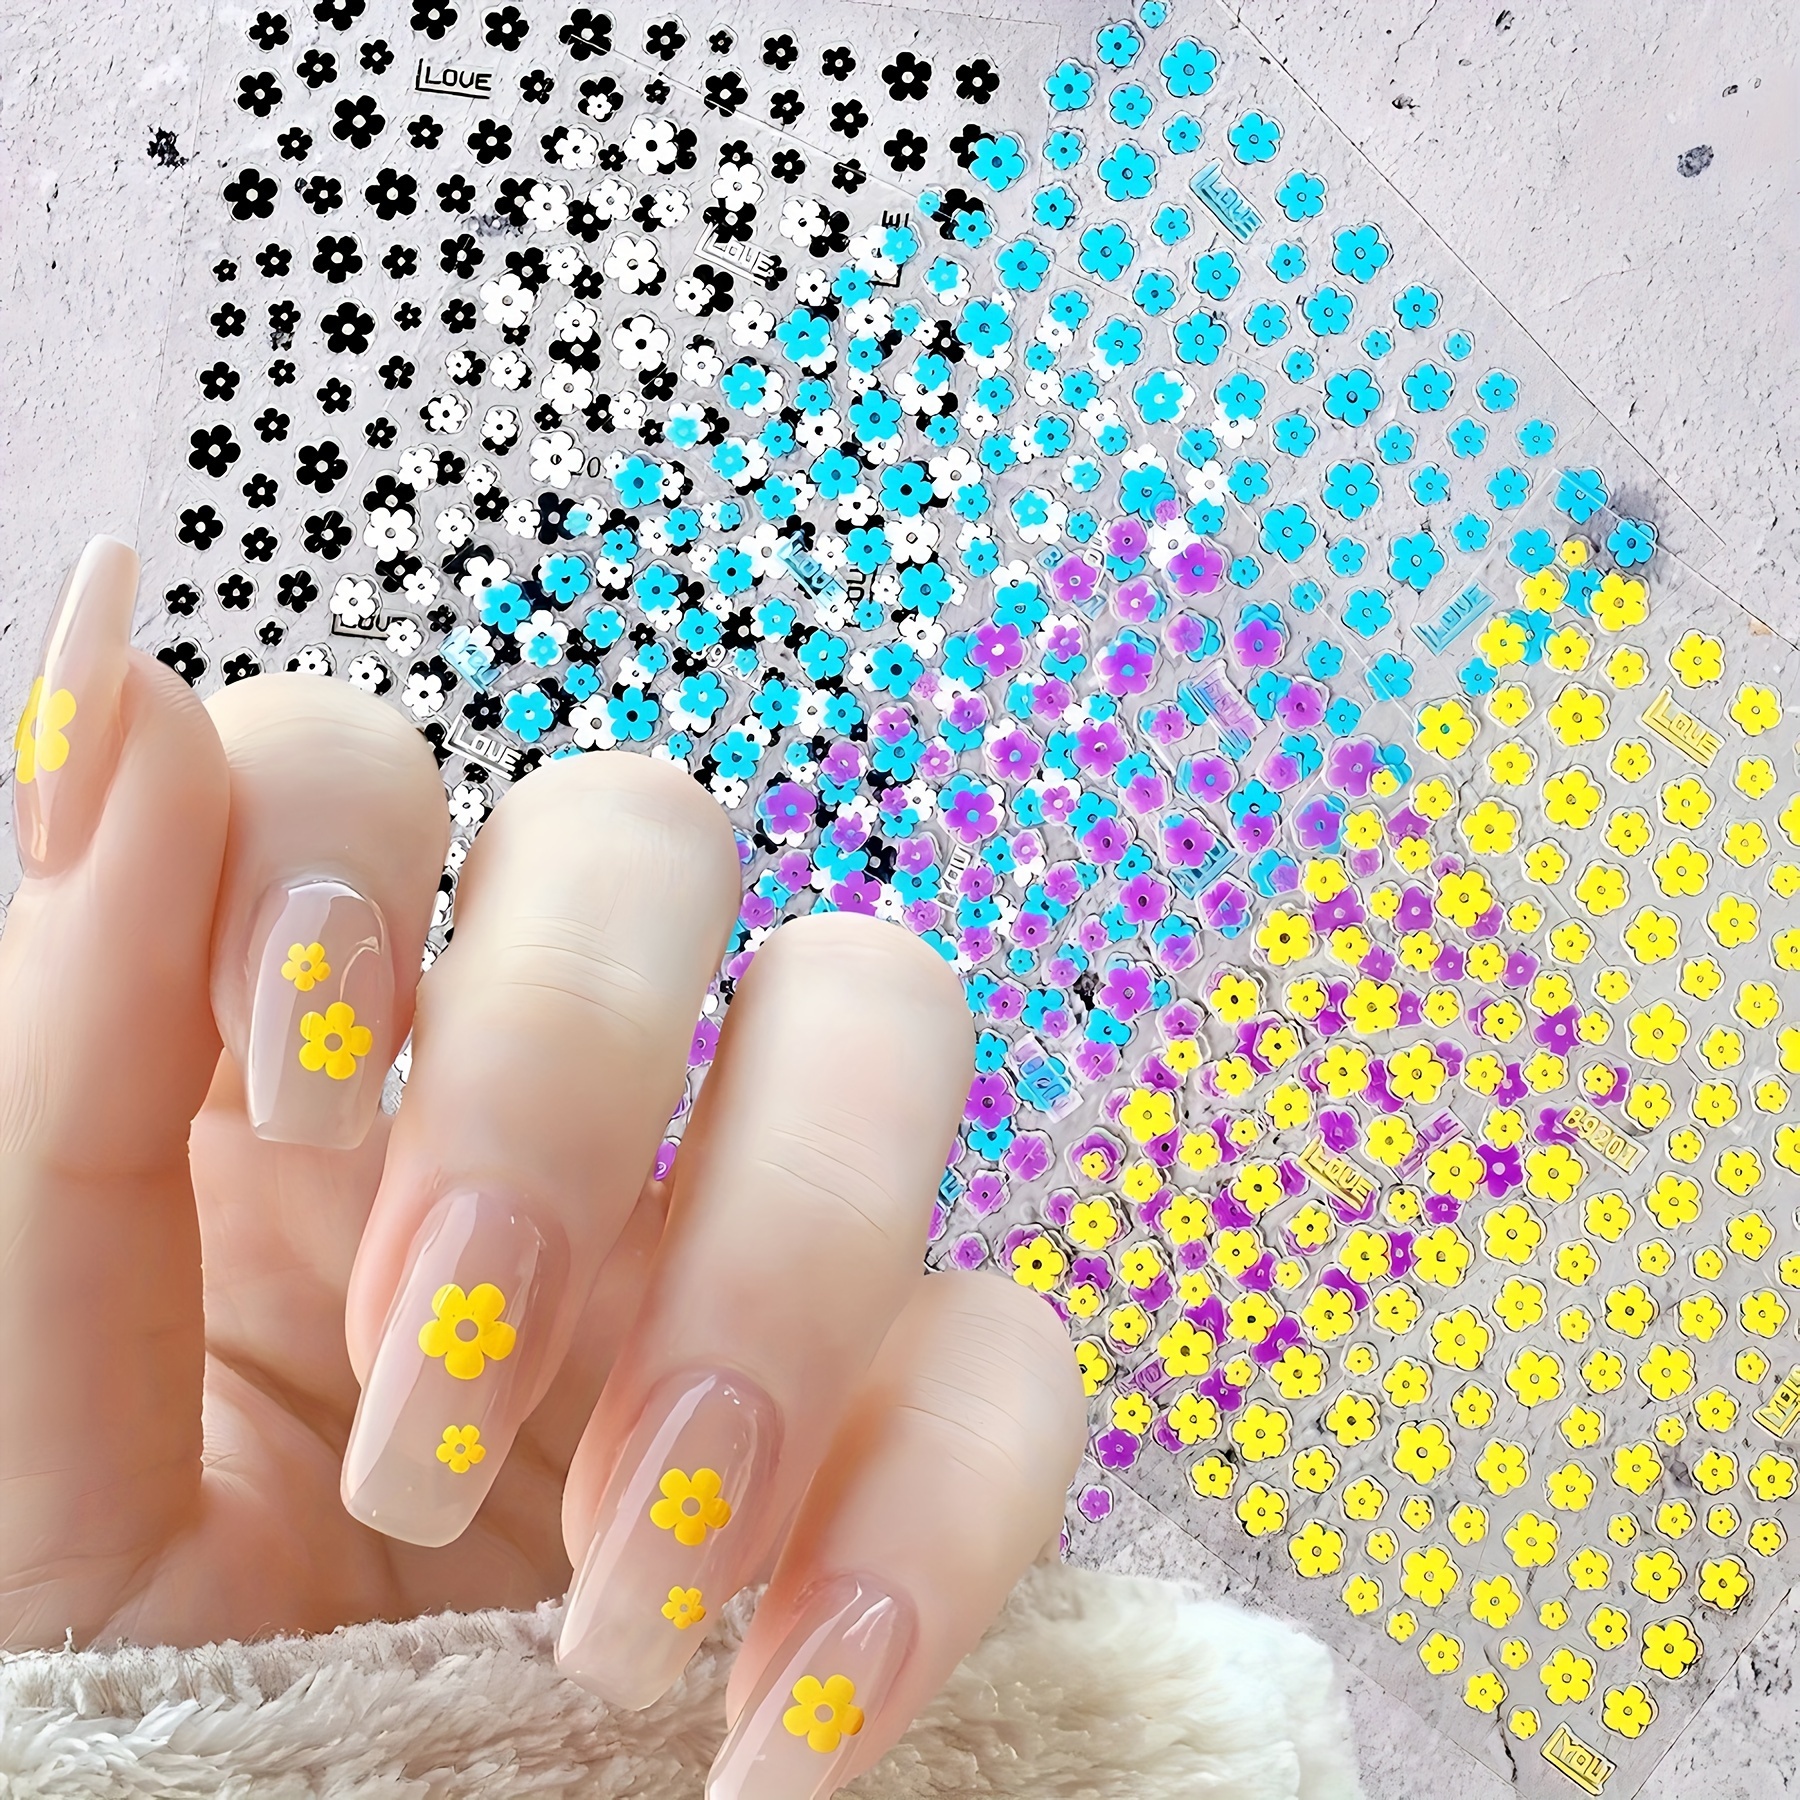 

30-piece Holographic Floral 3d Nail Art Stickers - Glossy, Self-adhesive Decals In Vibrant Colors For Women & Girls